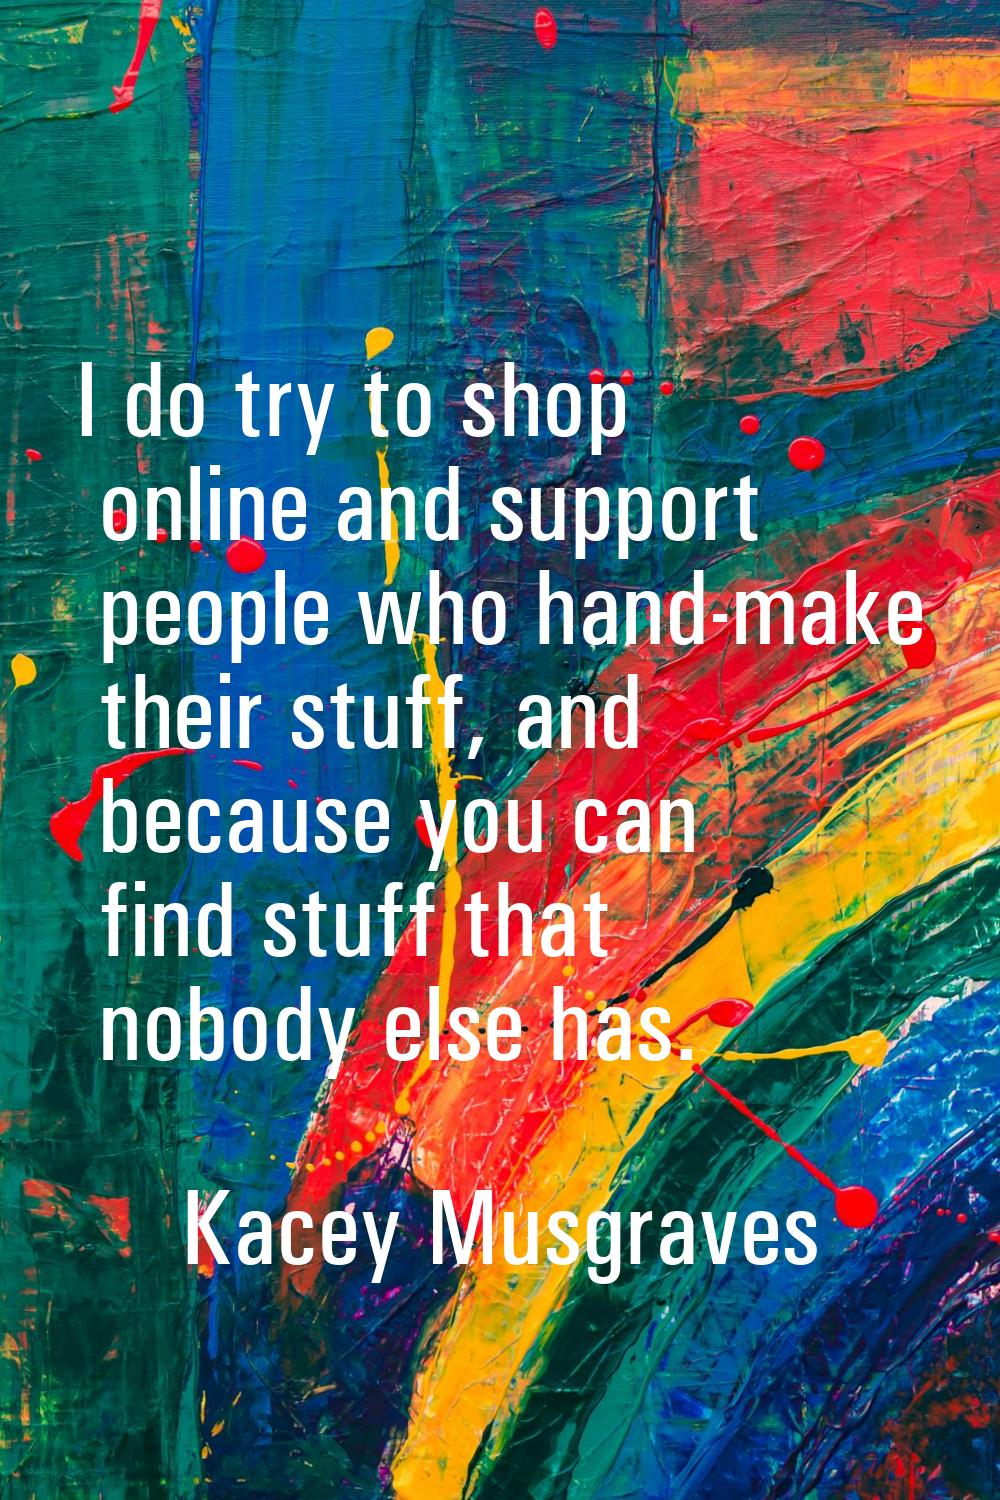 I do try to shop online and support people who hand-make their stuff, and because you can find stuf